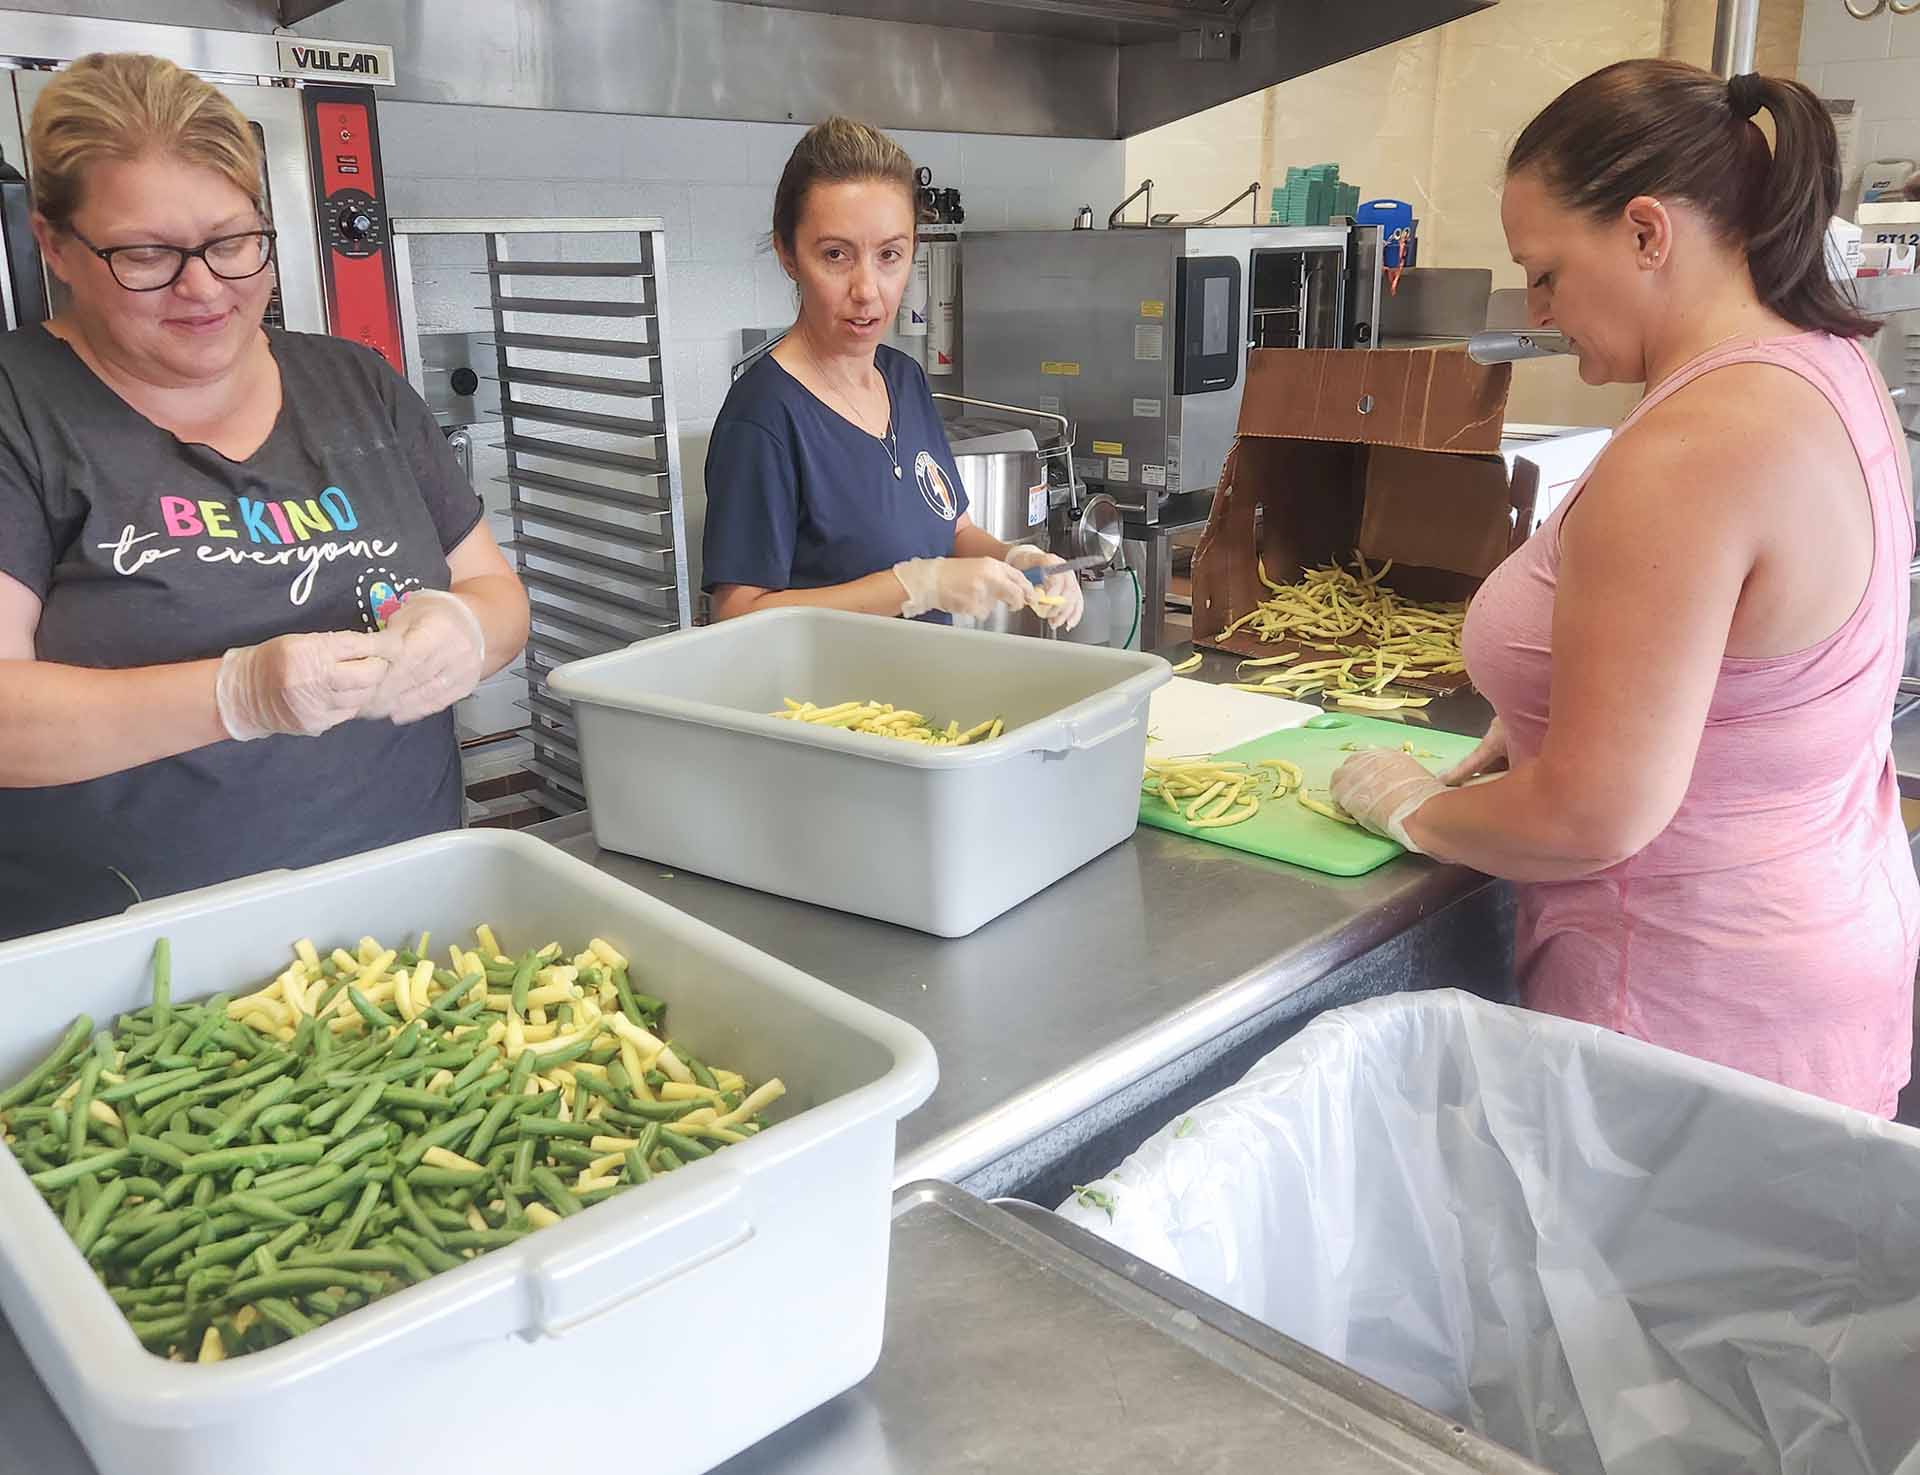 This summer, Attica Central School District team members (left to right) Melissa Brooks, Amanda Brown, and Jenelle Bauer helped the district break down and preserve produce from local farms for school meals.